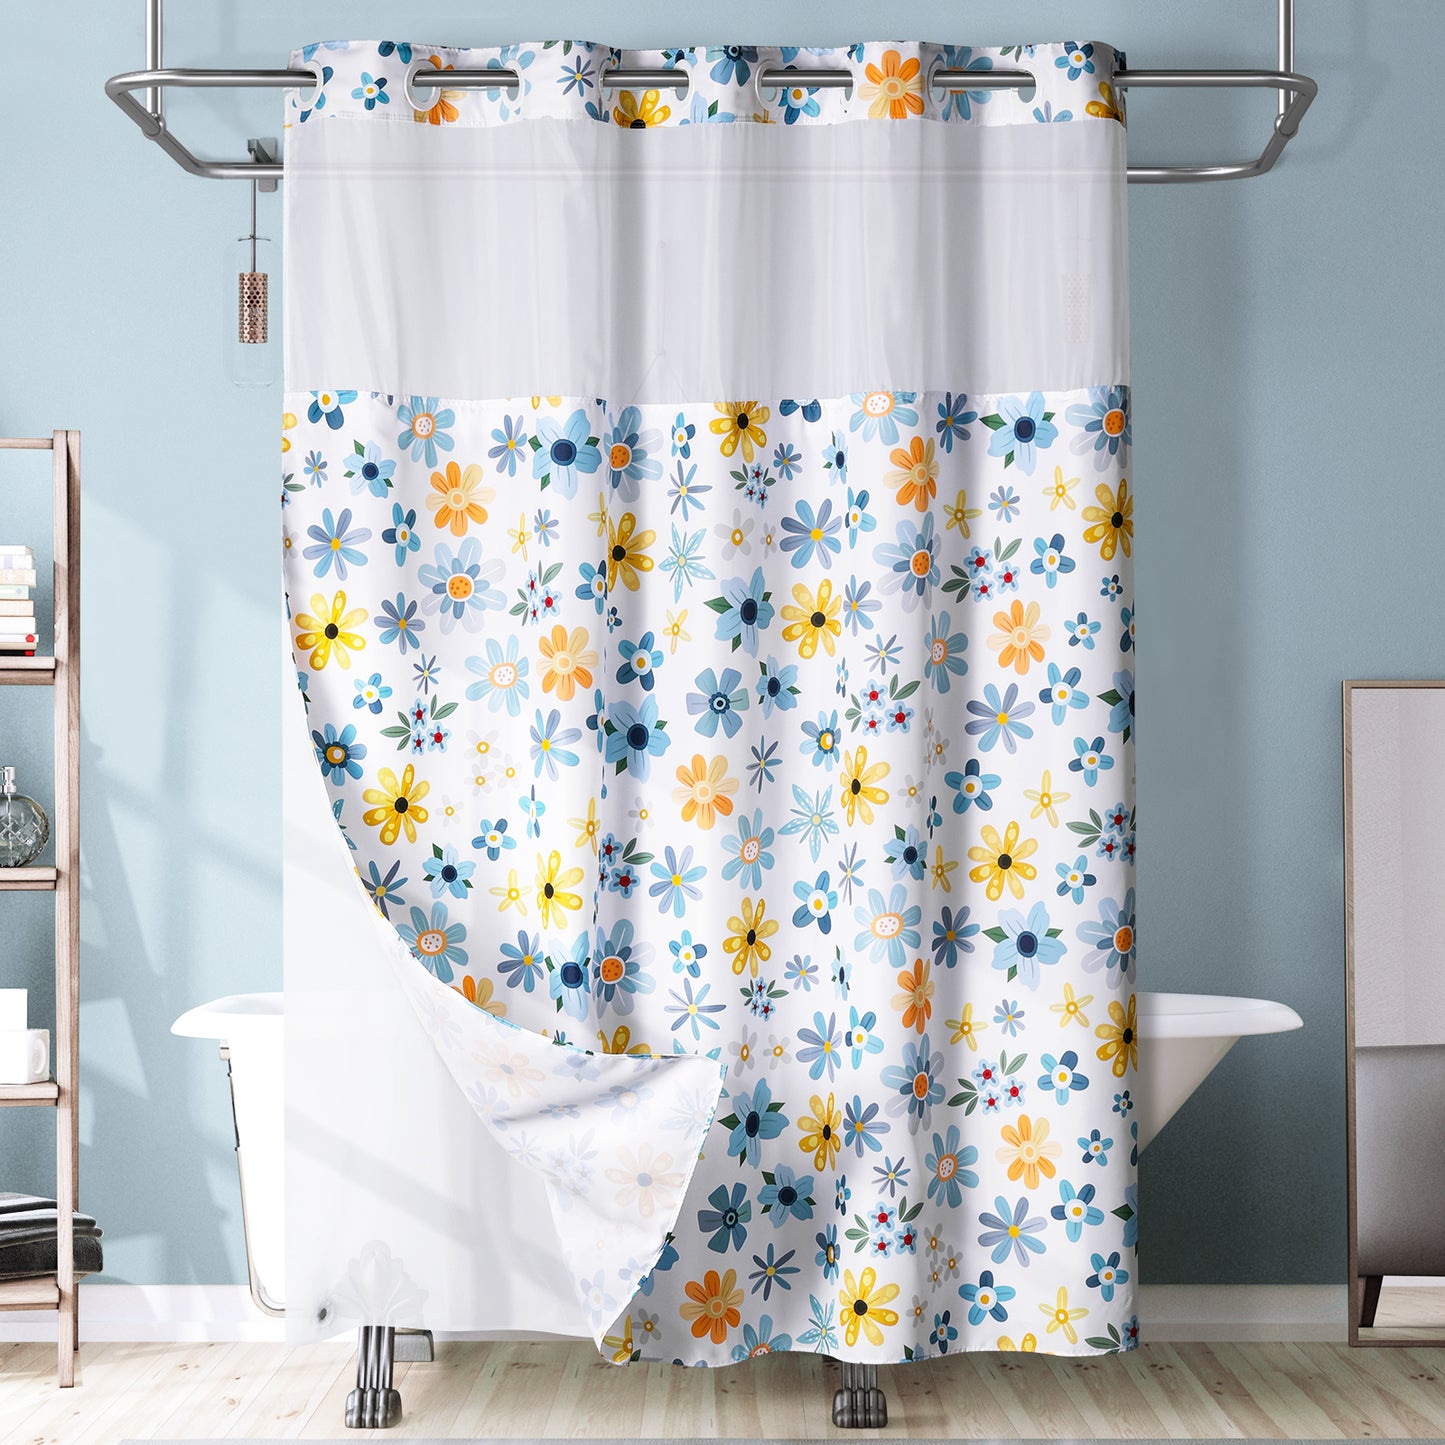 SnapHook Floral Shower Curtain with Snap-in Liner | 71WX74L, Yellow Daisy